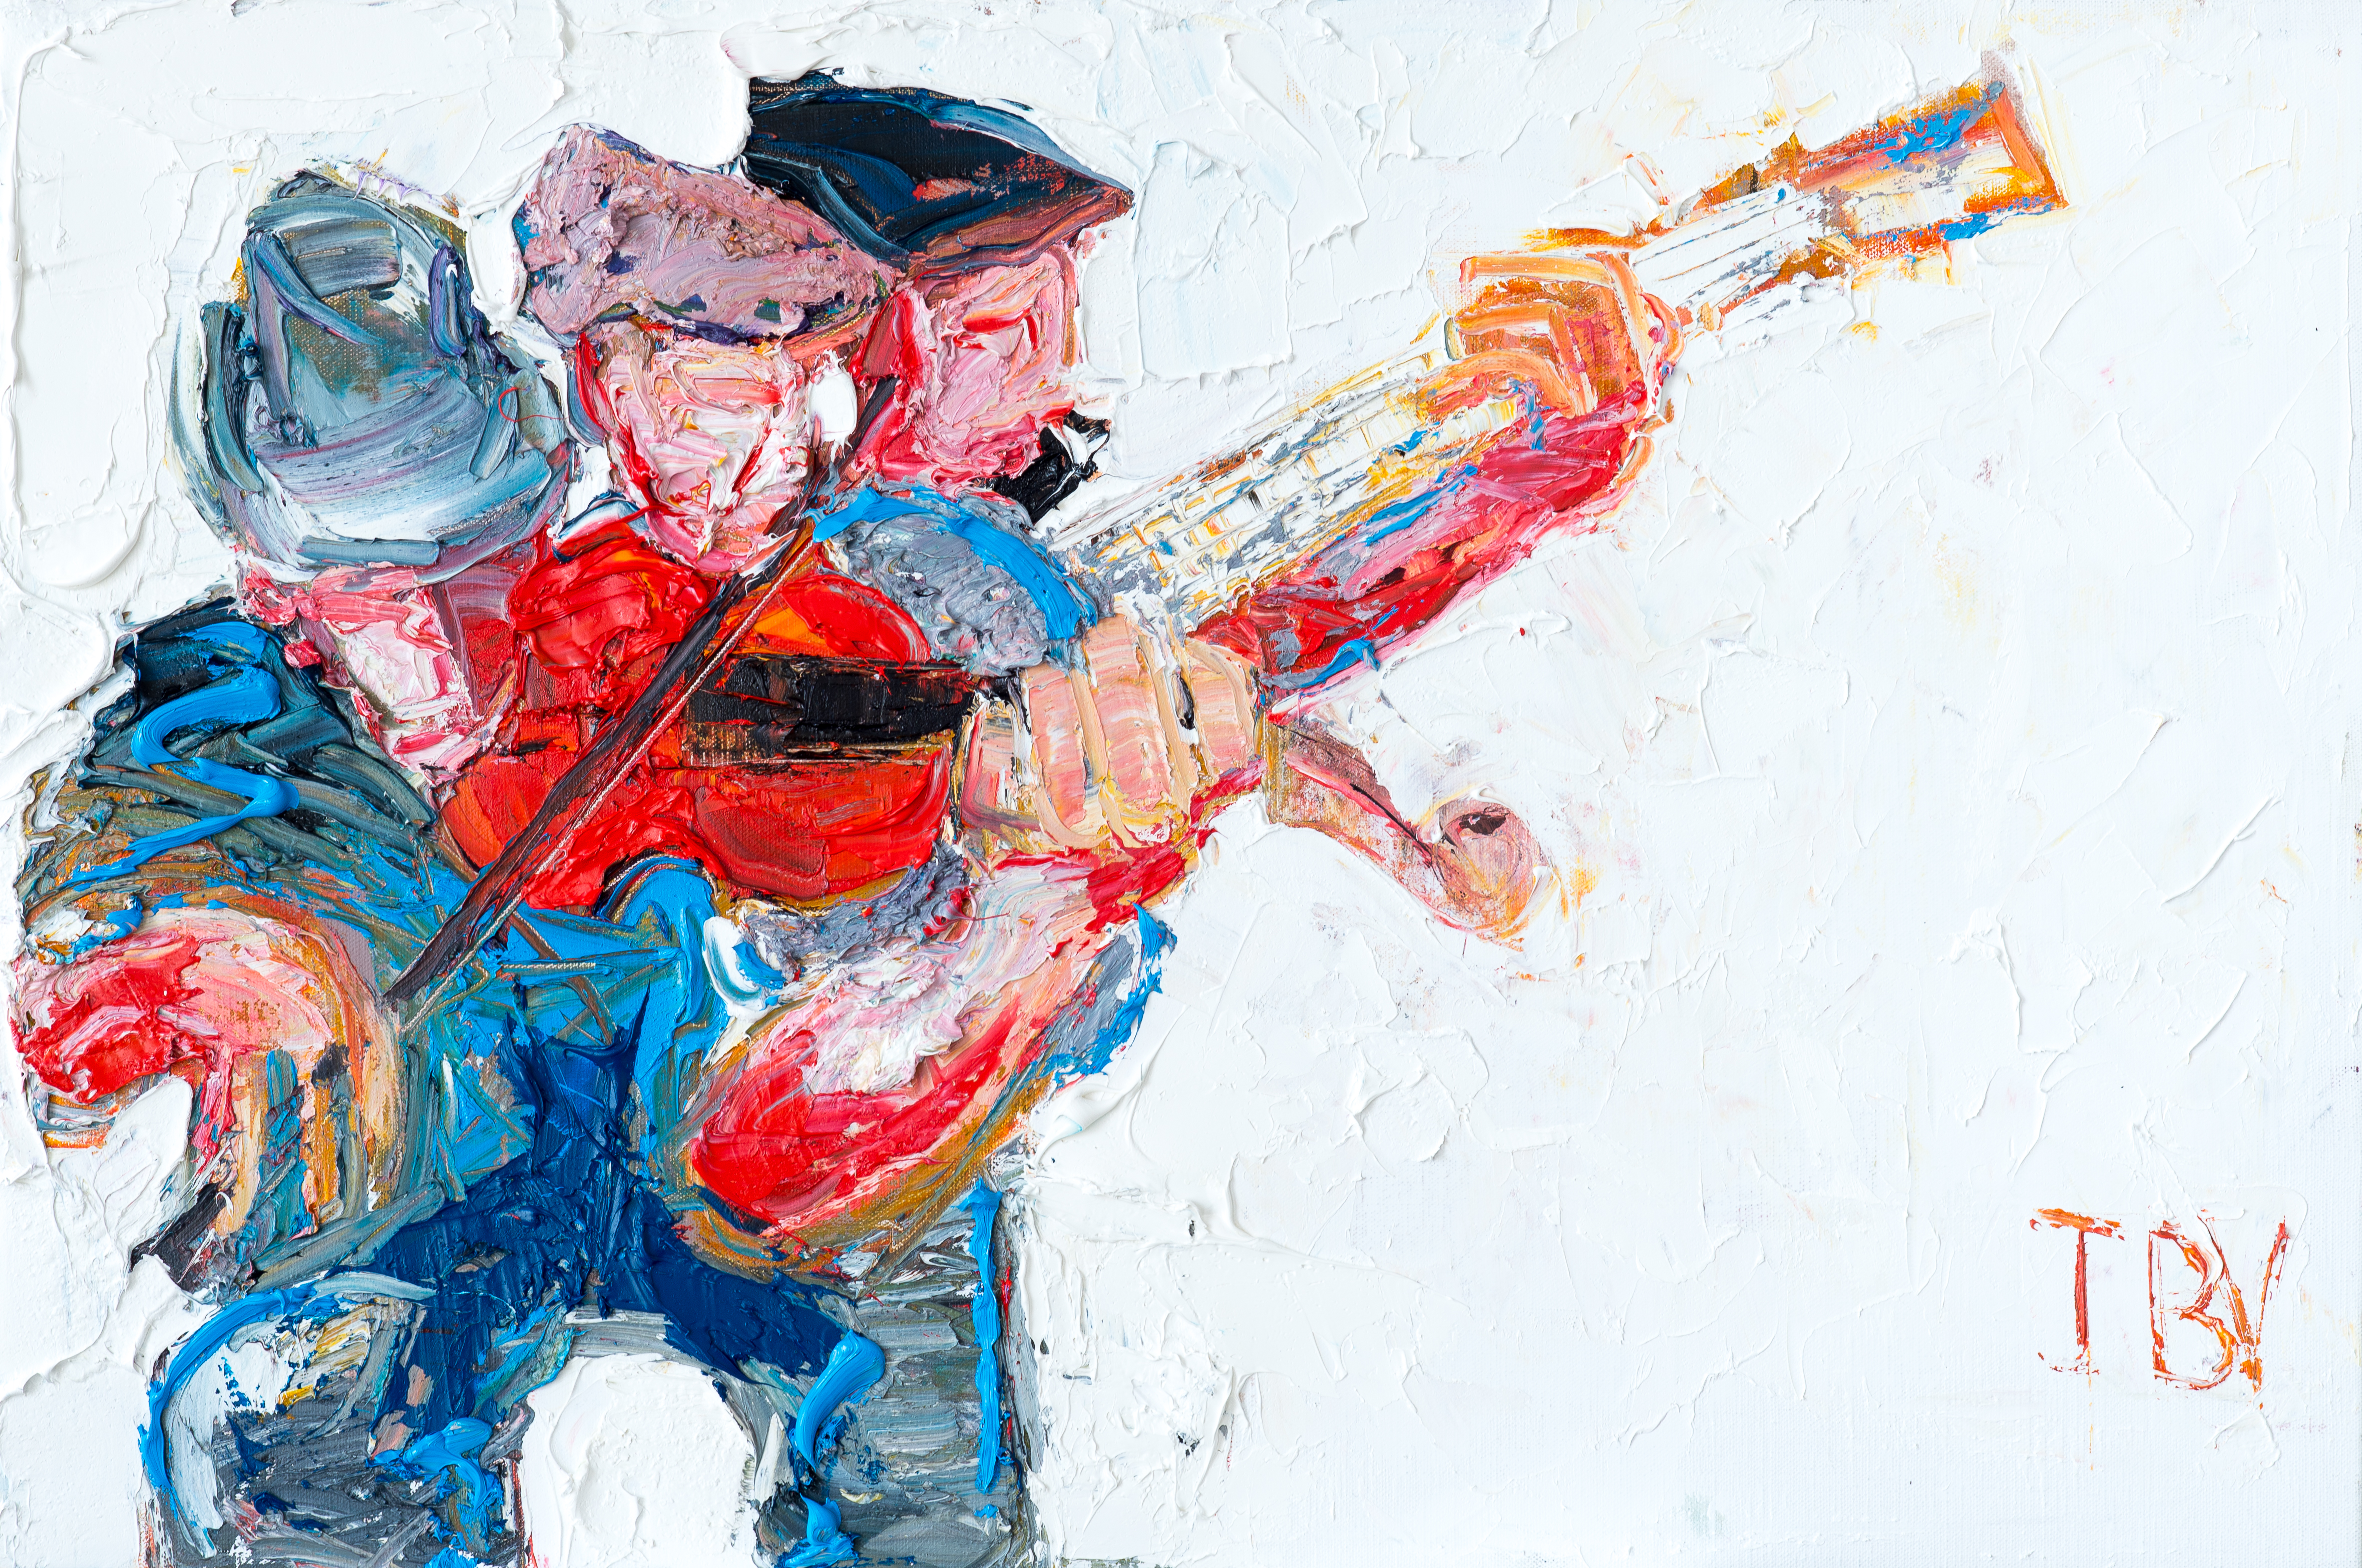 'Trio with the Banjo Player', 20" x 30", oil on canvas